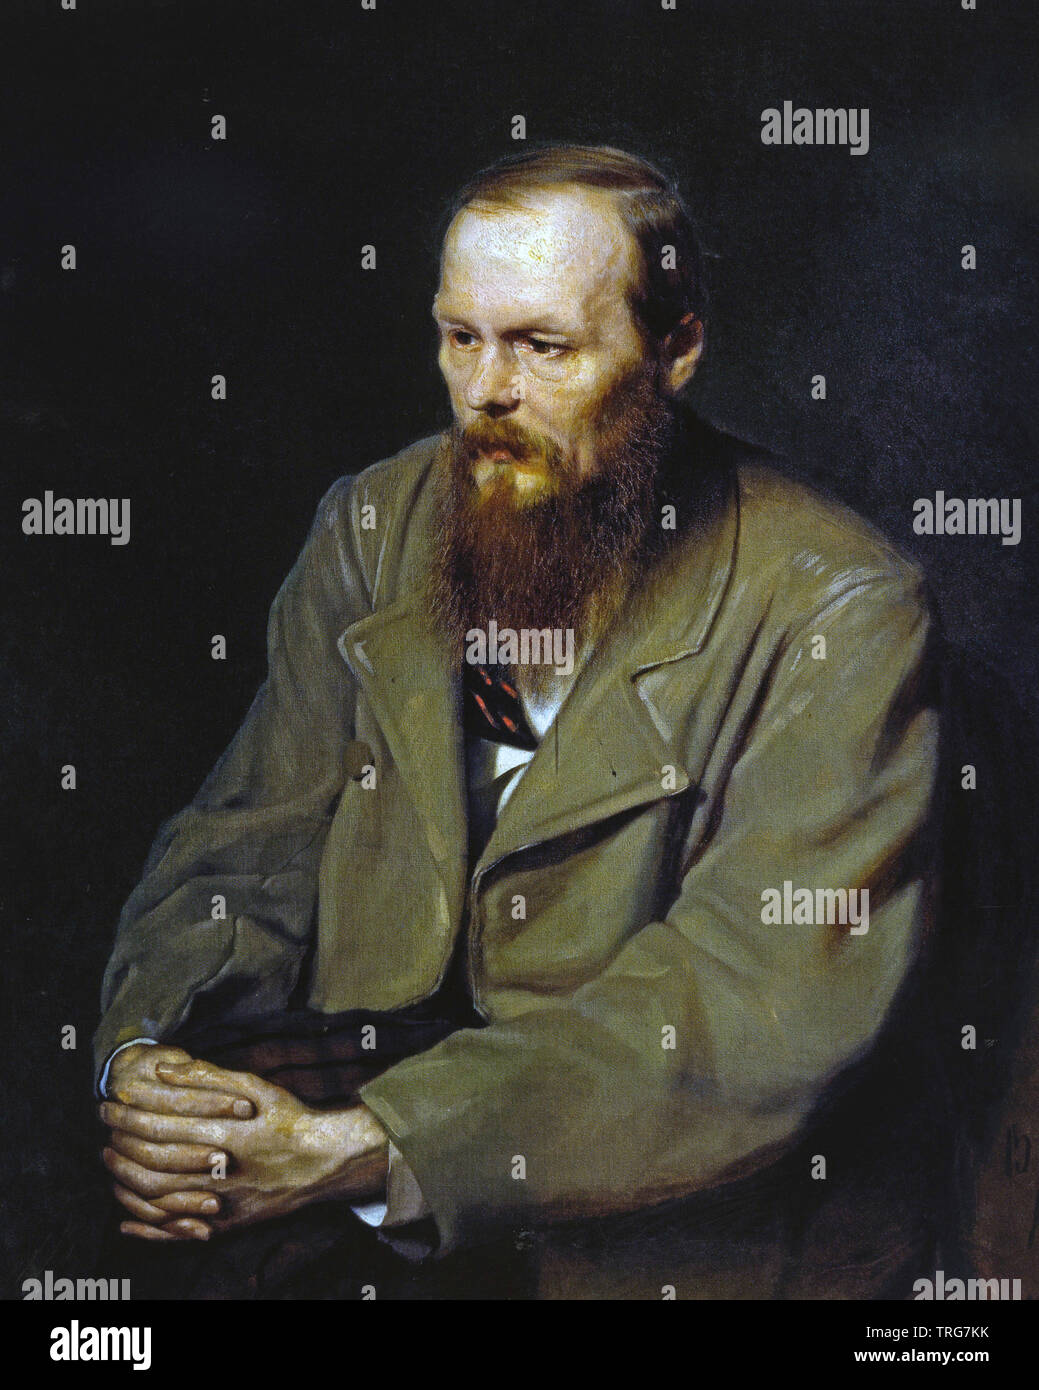 FYODOR DOSTOEVSKY (1821-1881) Russian novelist painted by Vasily Perov in 1872 Stock Photo